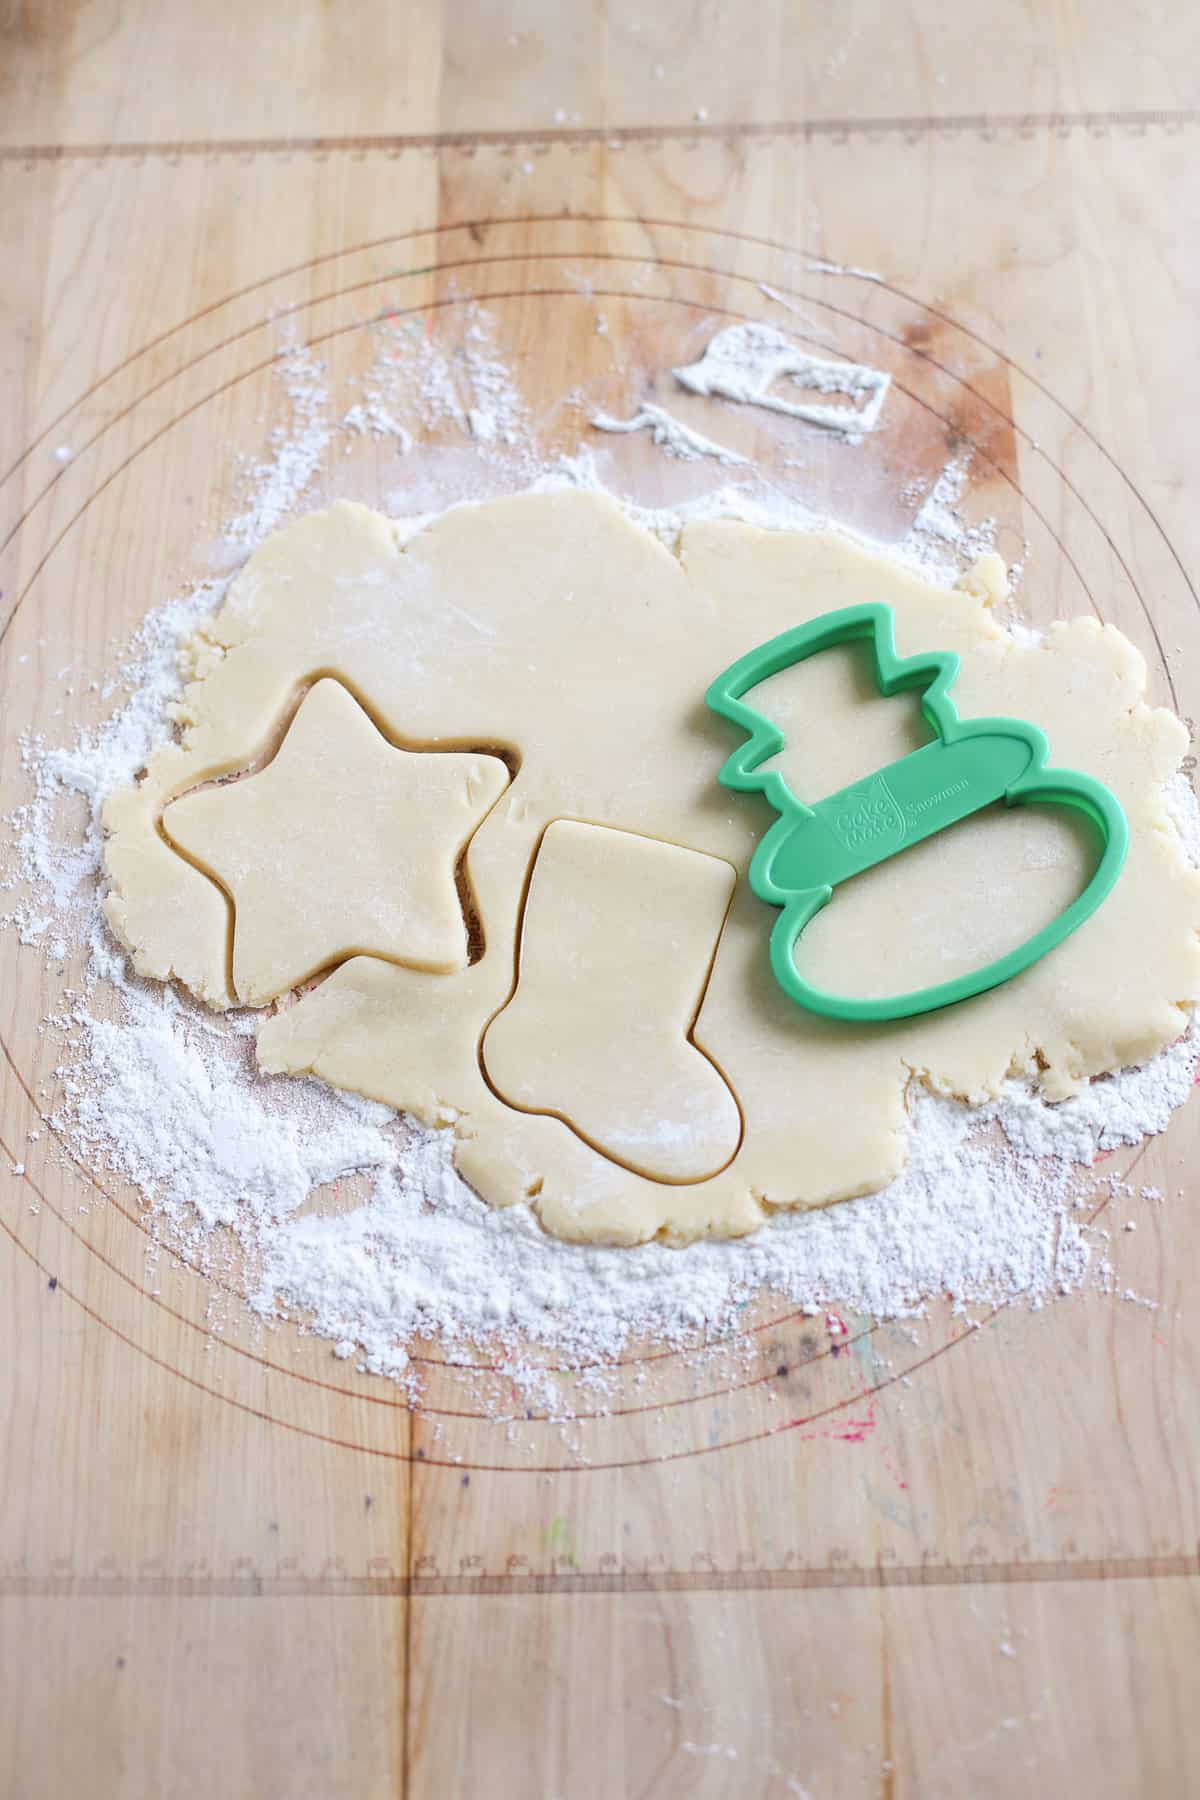 Sugar cookie dough rolled out with cookie cutters making Christmas shapes. 